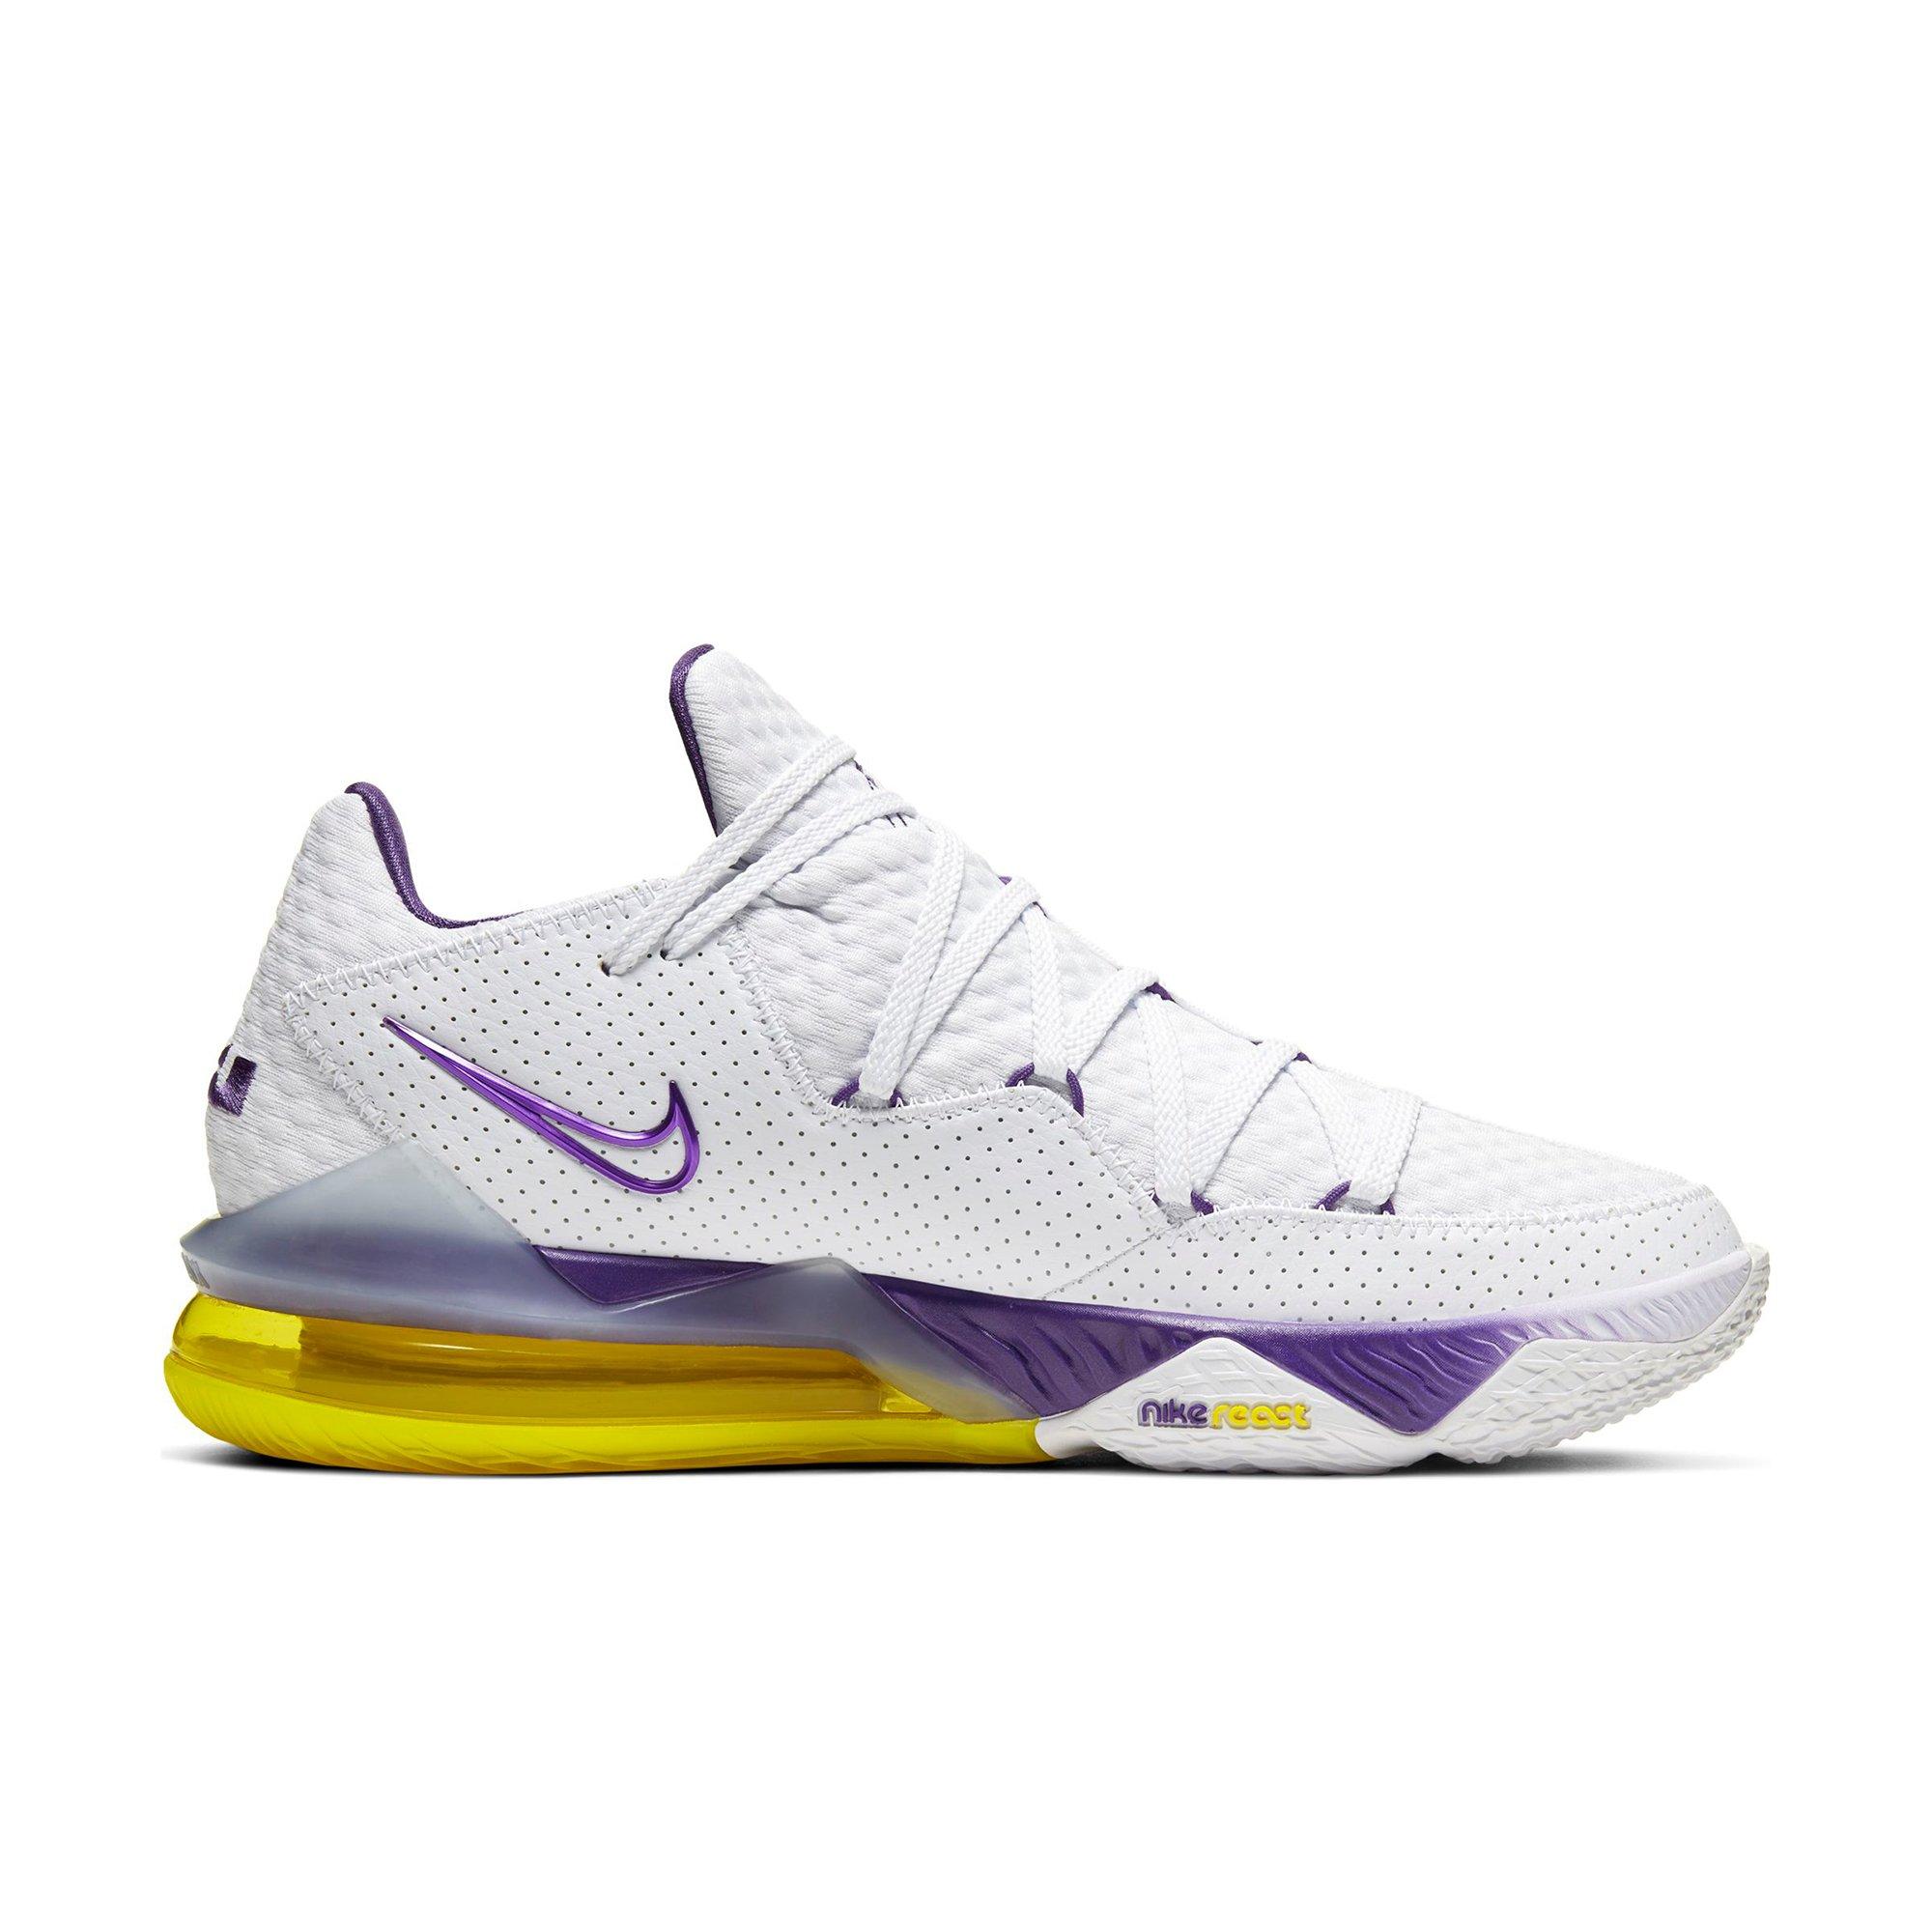 yellow and purple nike shoes